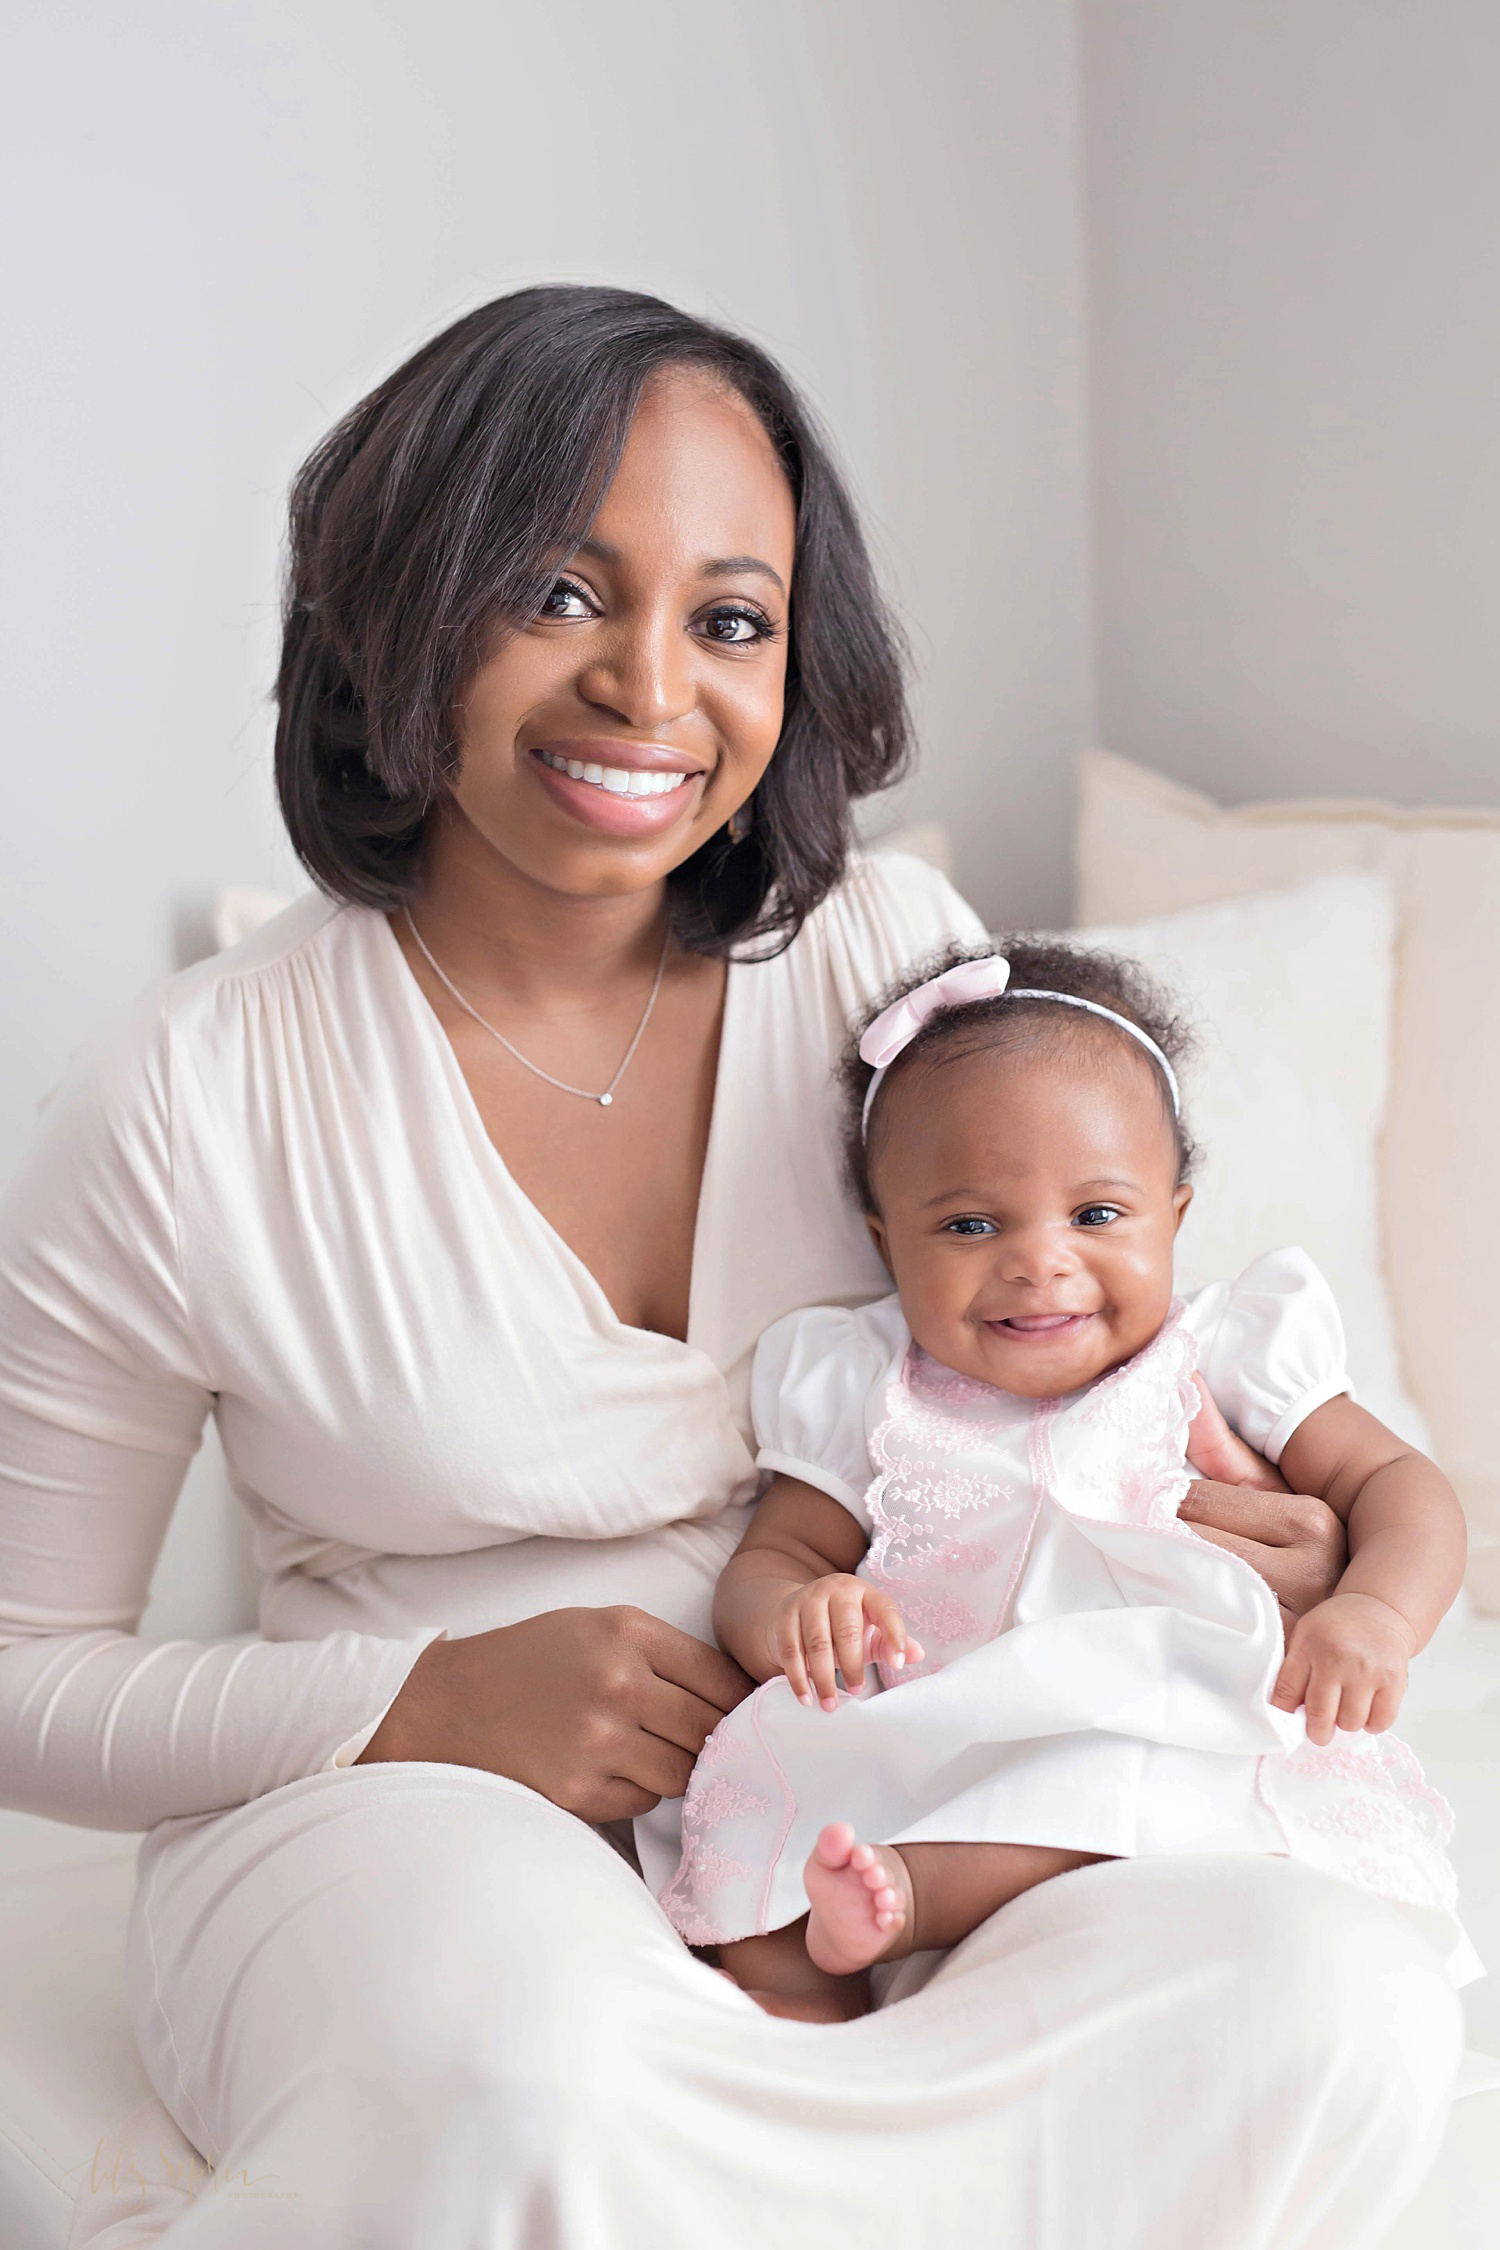  Image of an African American mother sitting on a bed and holding her smiling, three month old daughter, on her lap.&nbsp; 